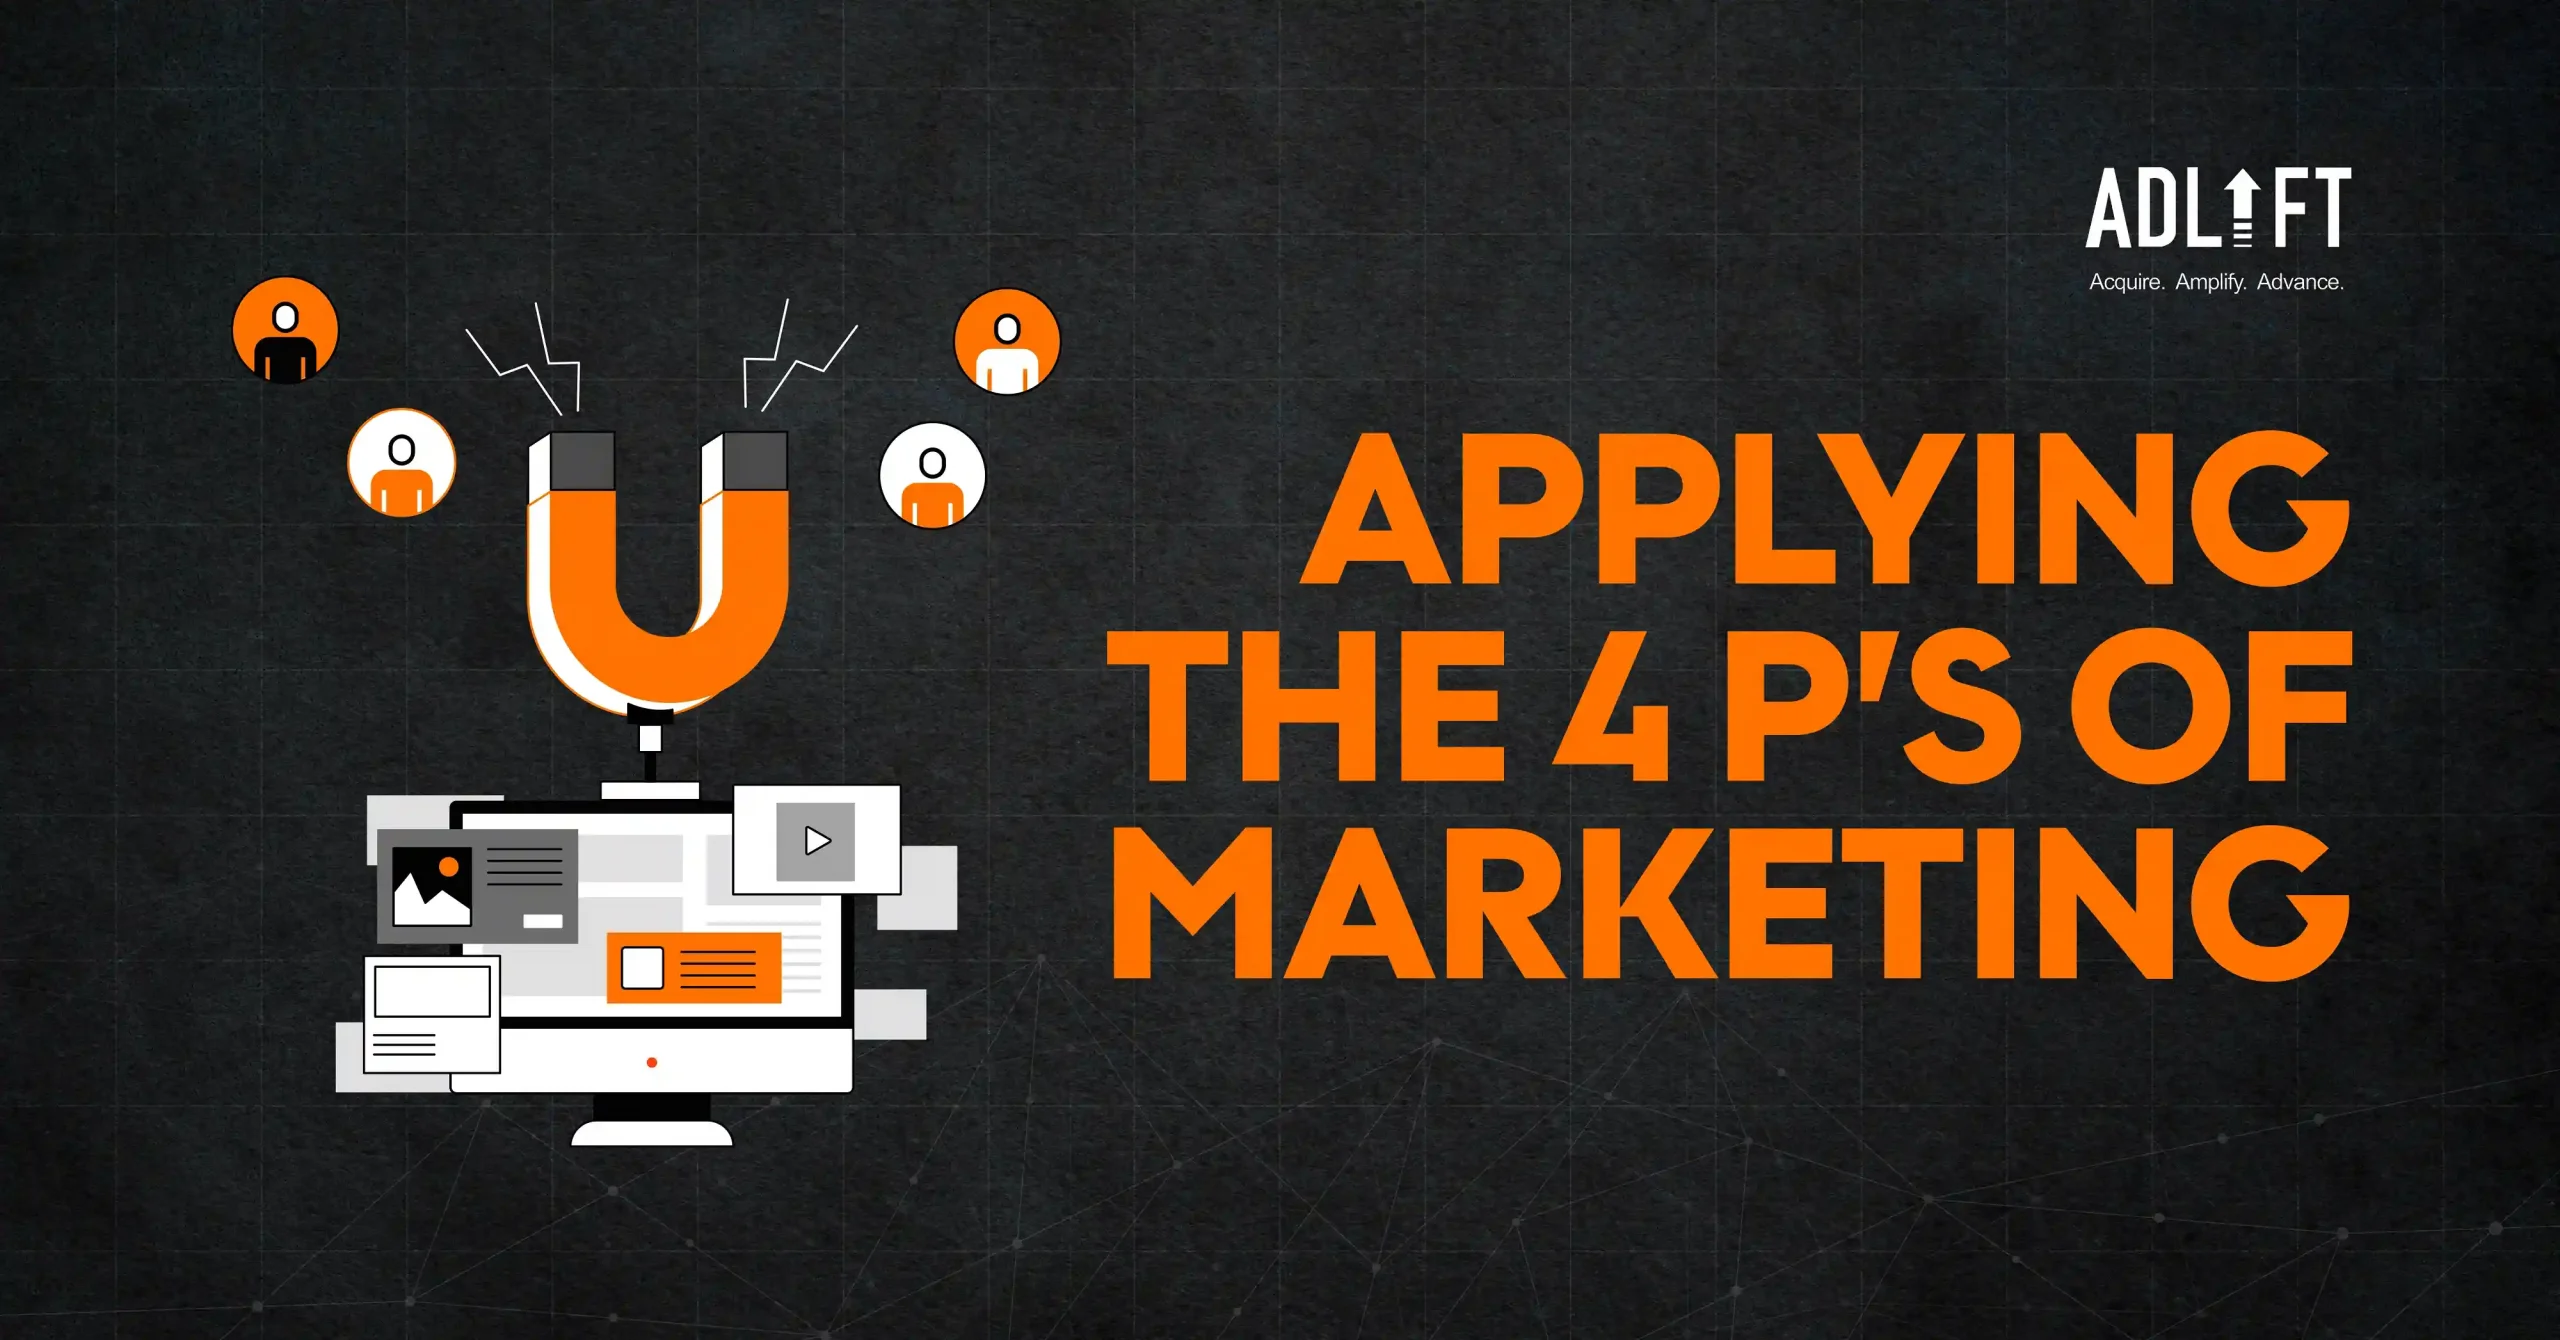 From Product to Promotion: A Fresh Take on the 4 Ps of Marketing